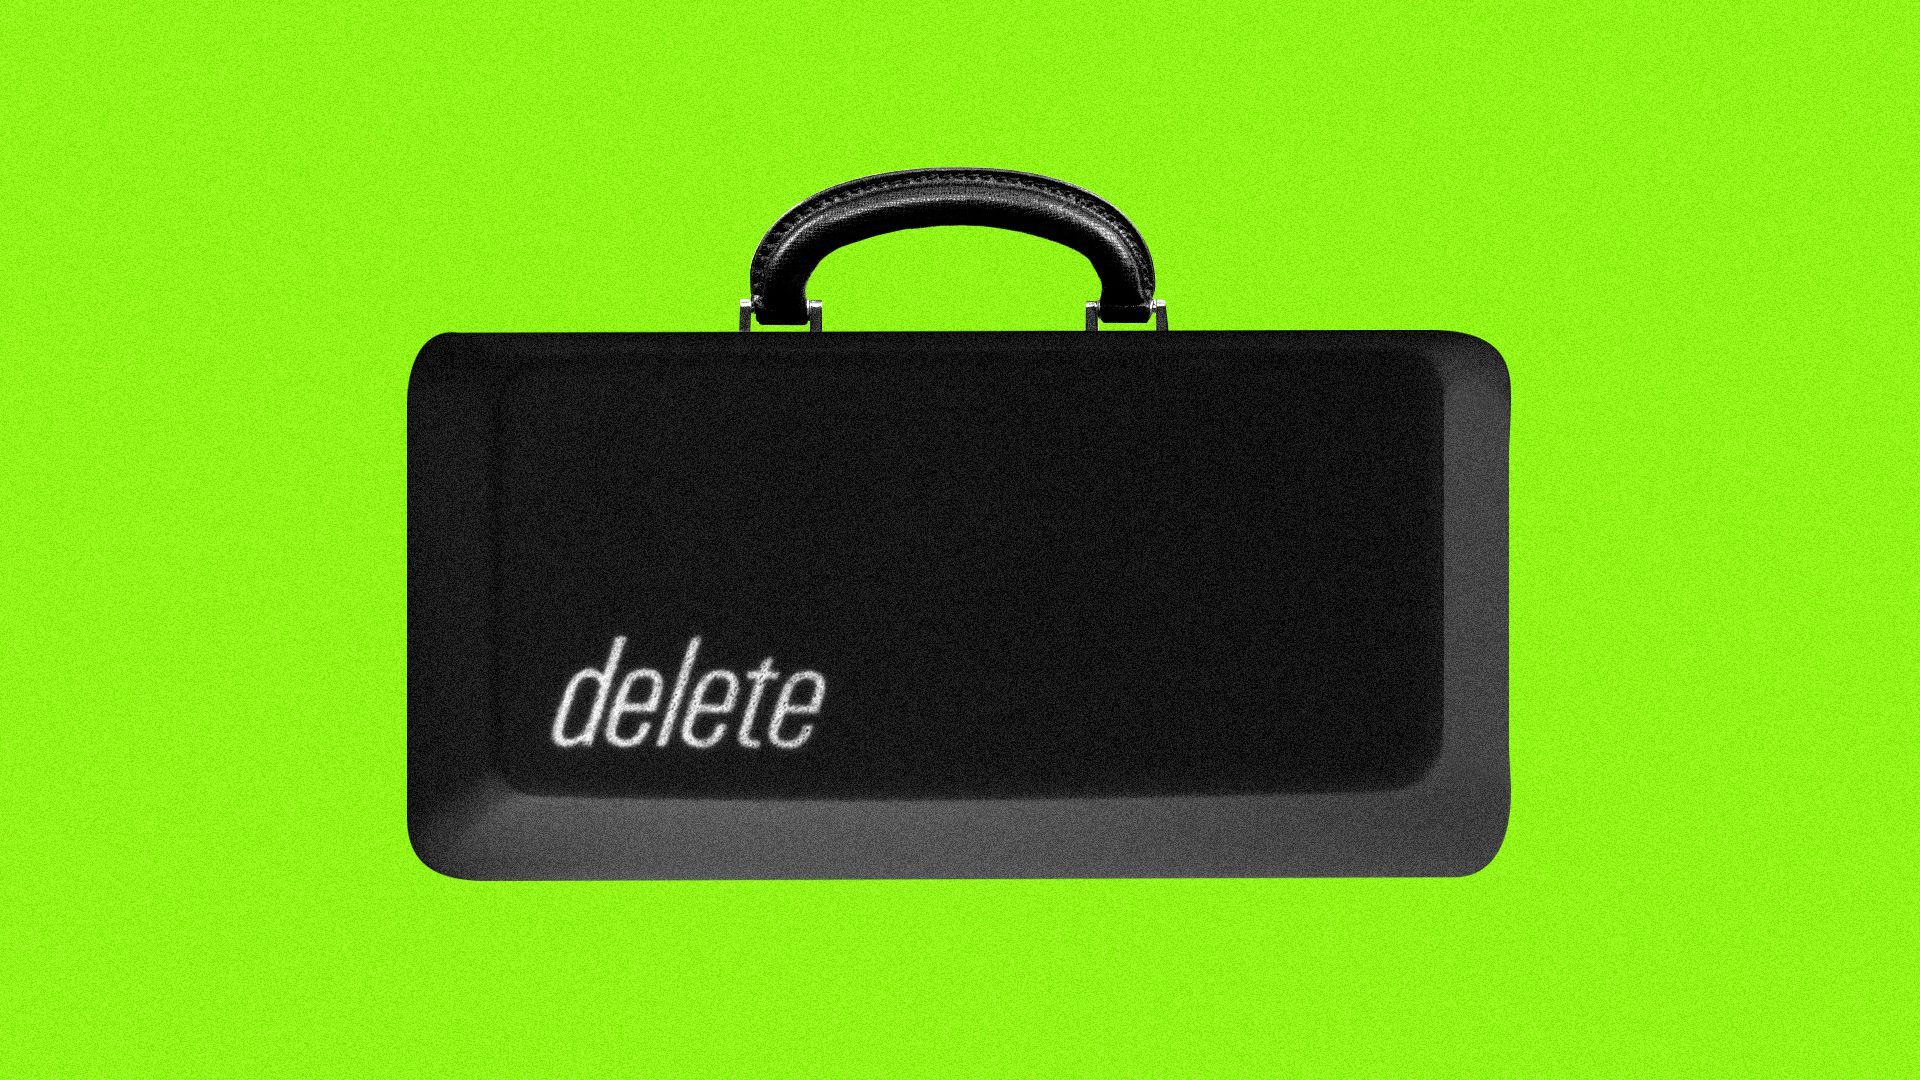 Illustration of a delete key fashioned as a briefcase